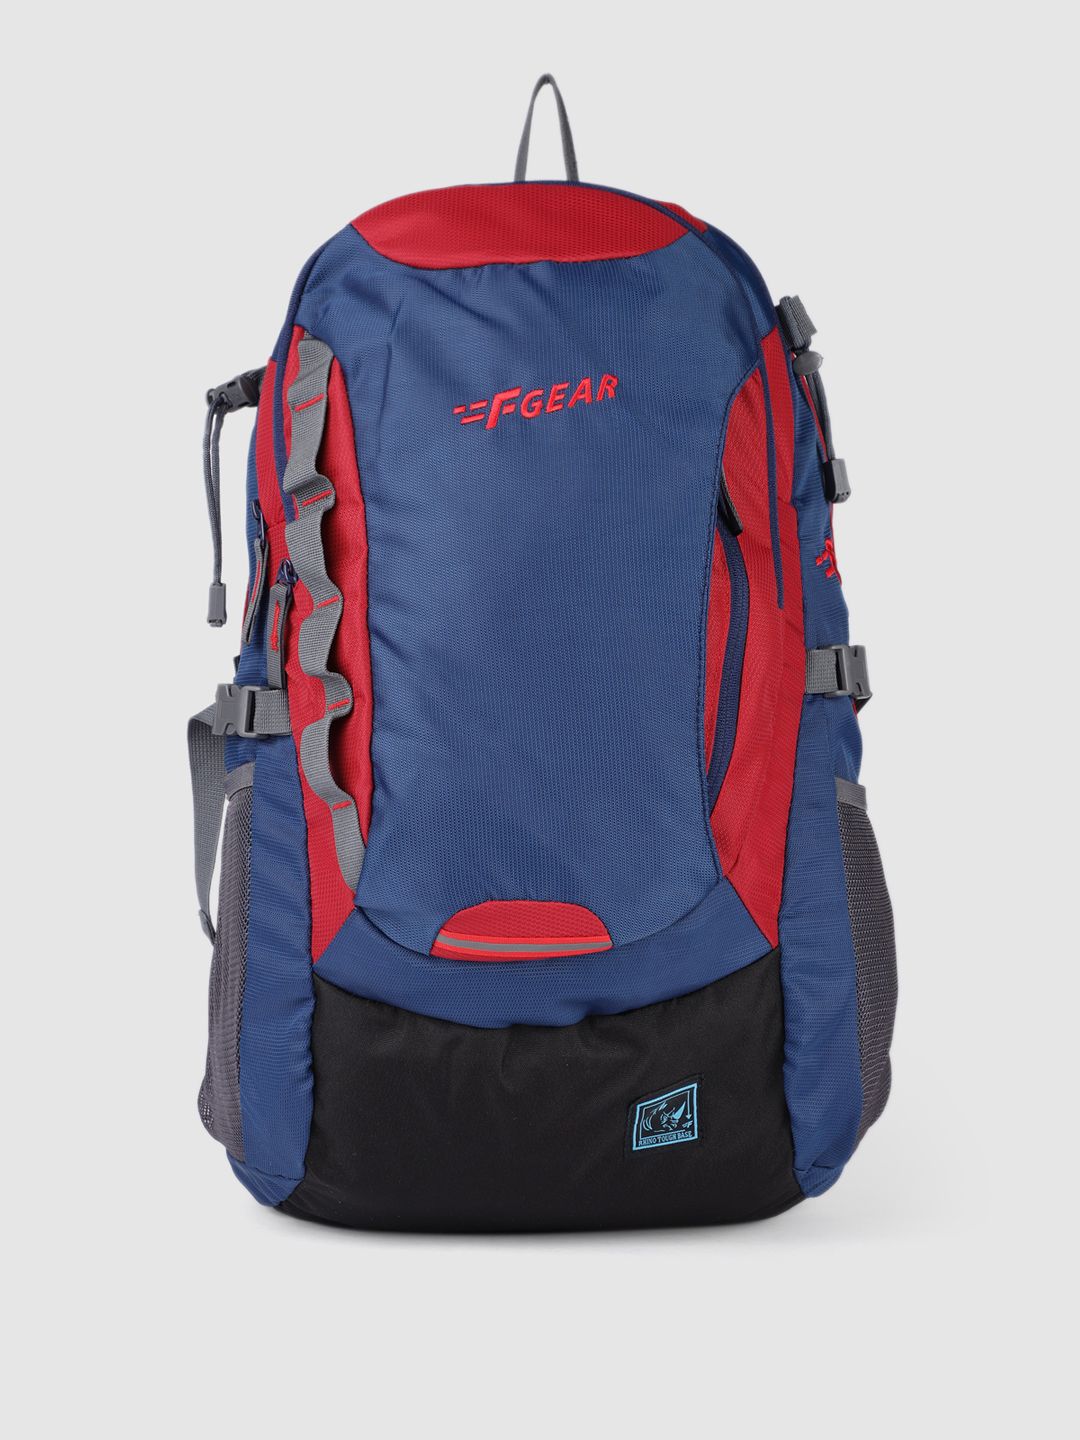 F Gear Unisex Navy Blue & Red Colourblocked Fortune Laptop Backpack Price in India